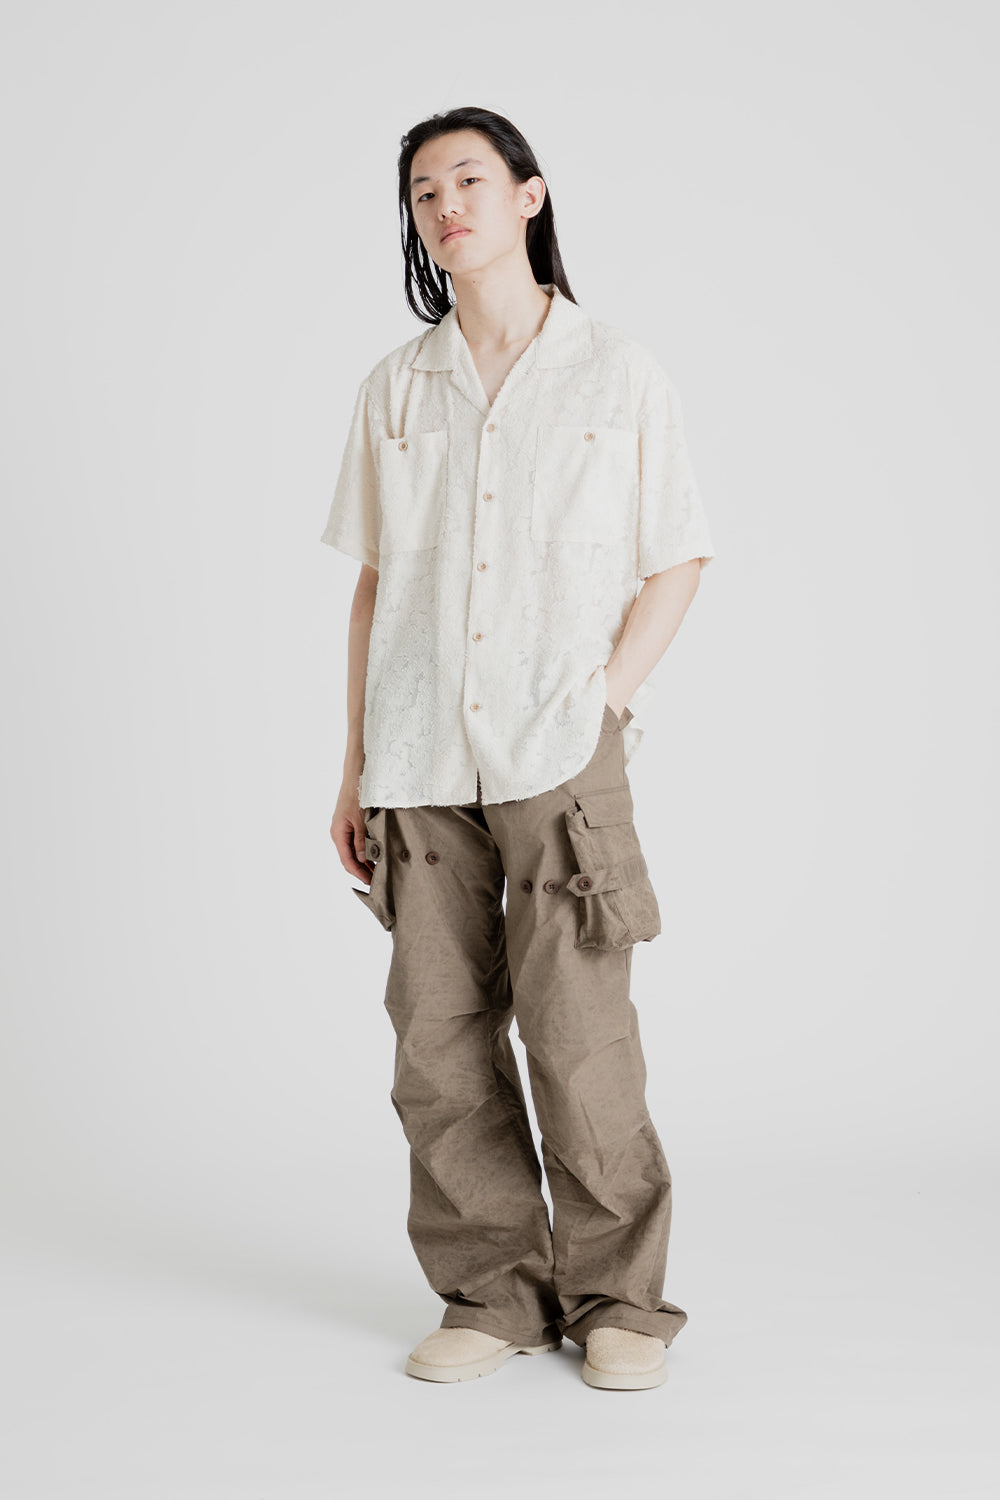 Andersson Bell Fantini Crack Cargo Pants in Khaki